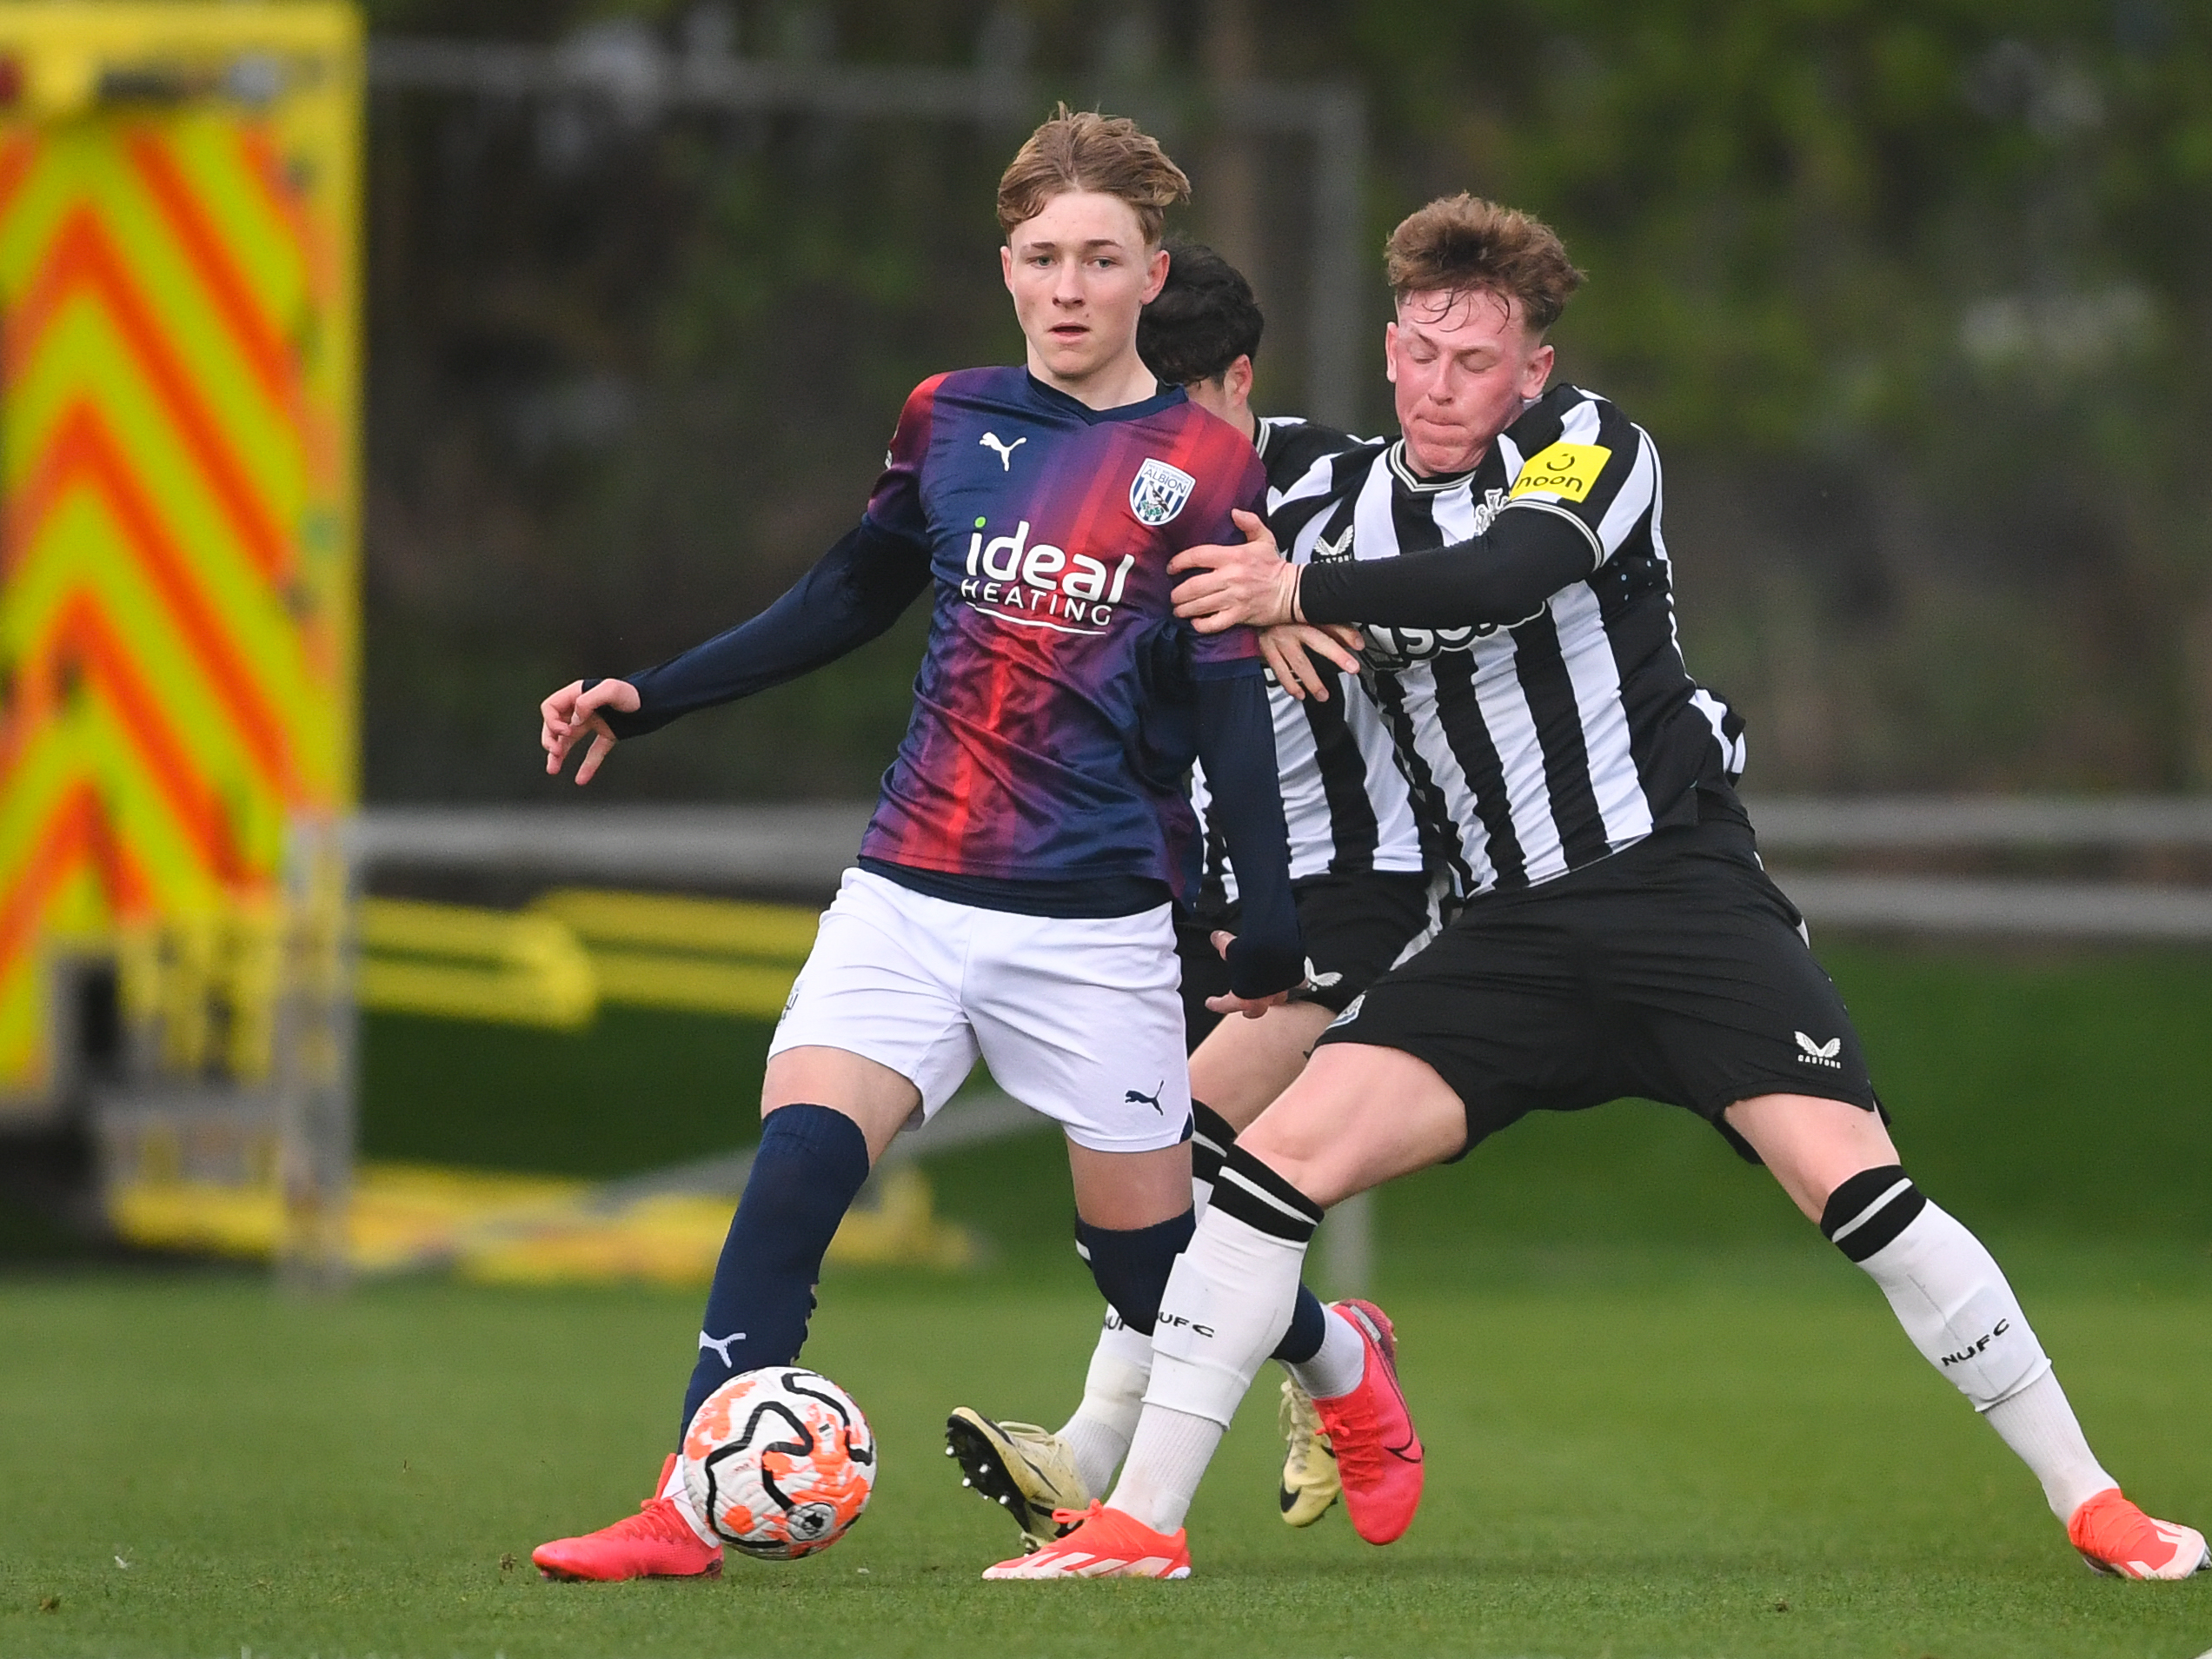 A photo of Ollie Bostock in the red and blue 23 24 kit in action for Albion's PL2 team v Newcastle